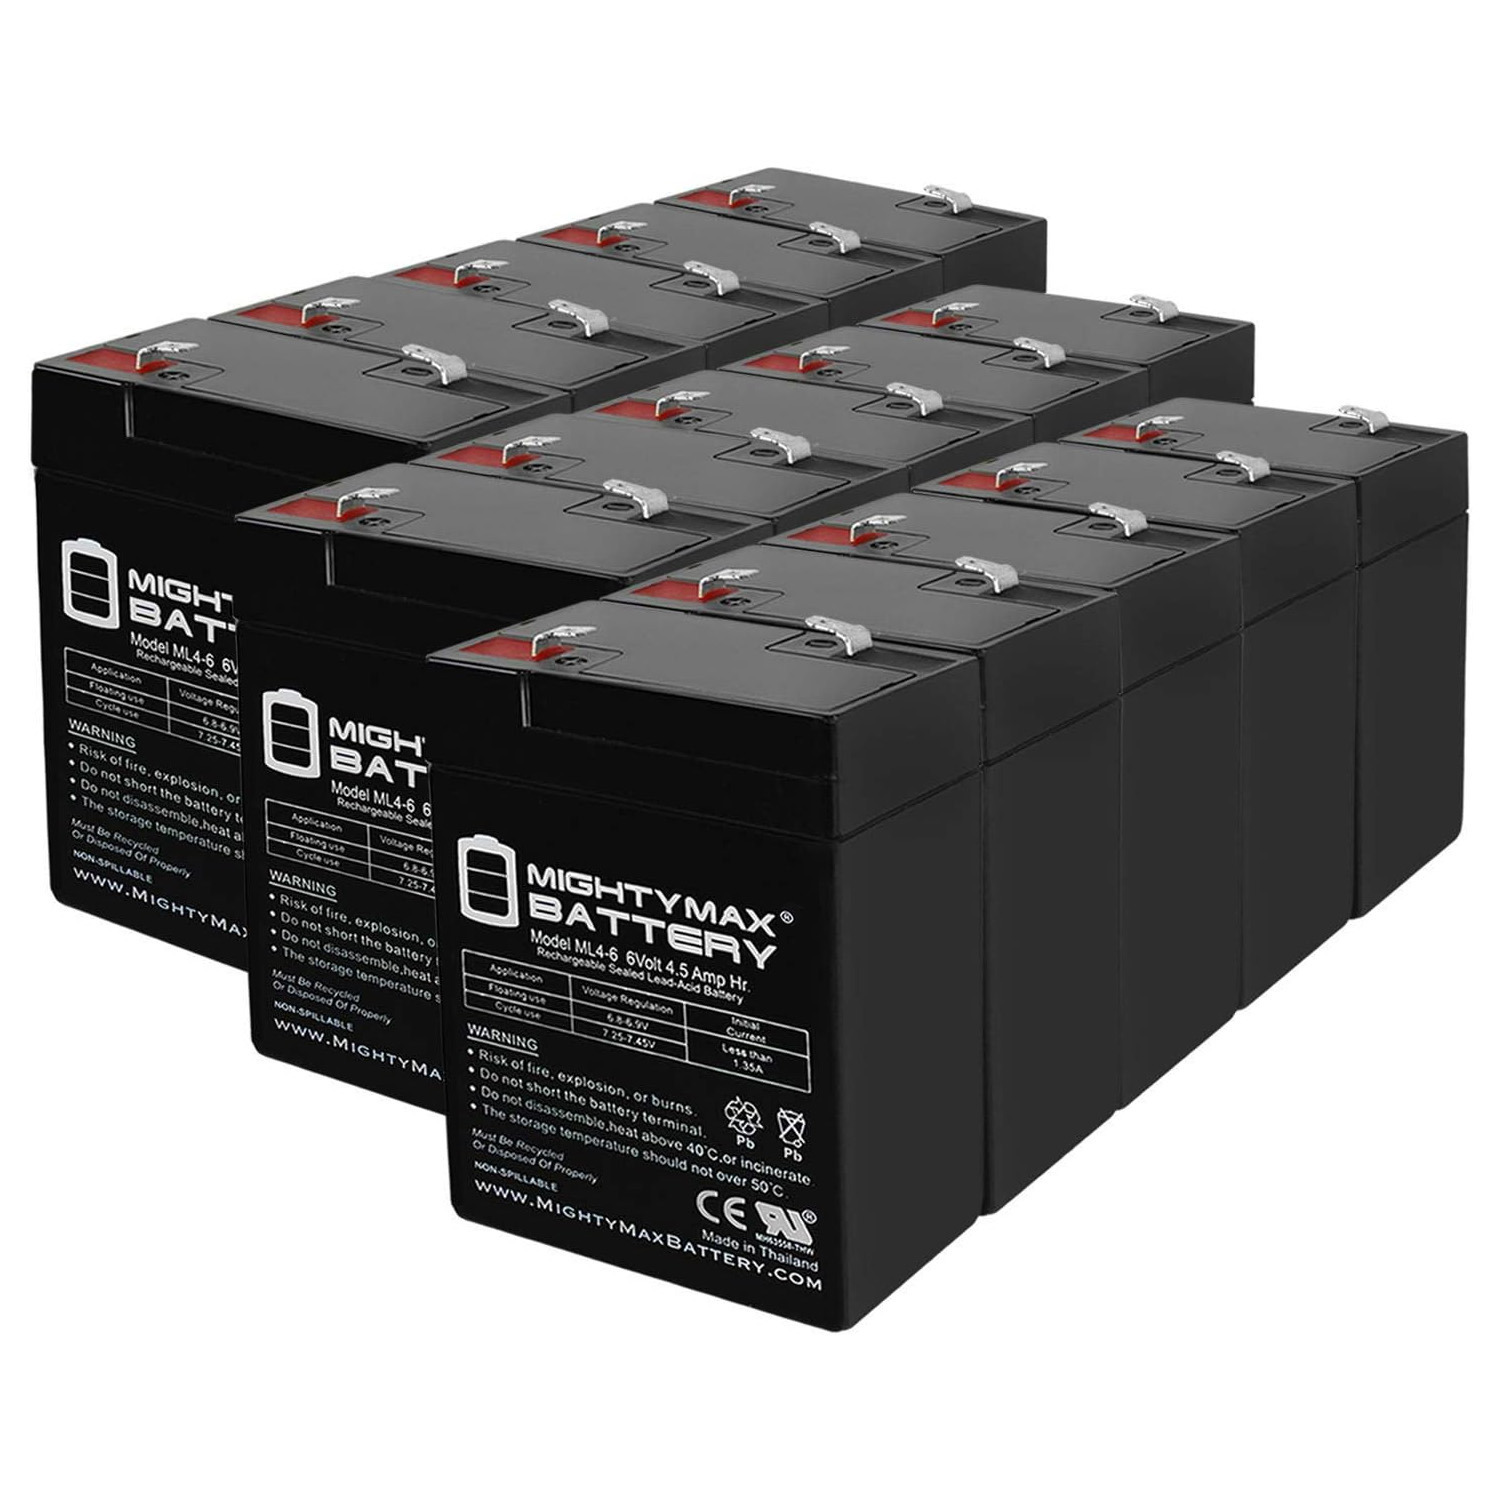 6V 4.5AH Replacement Battery for Sure-Lites MPS-640-SP - 15 Pack